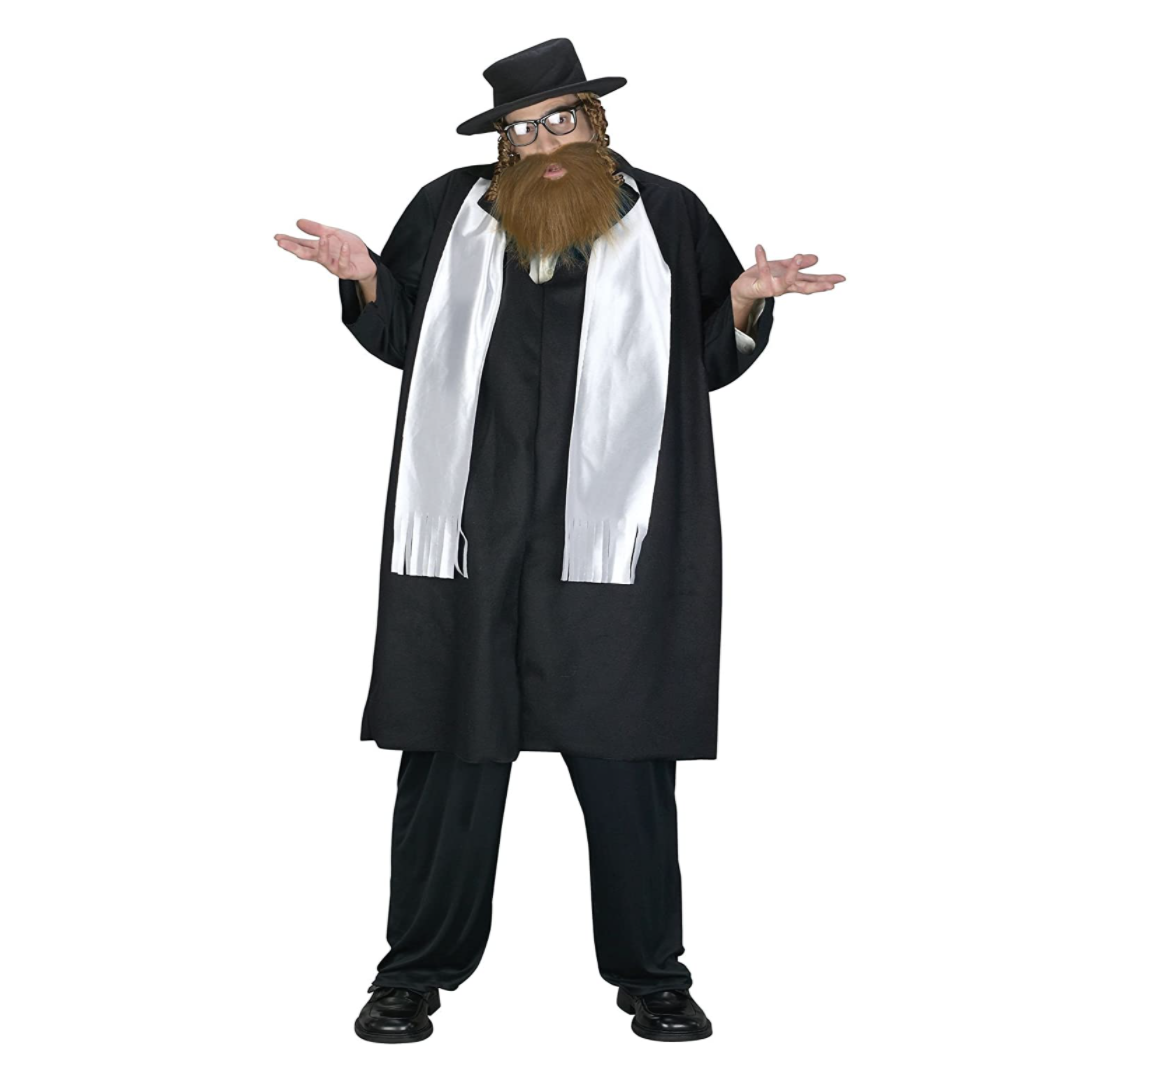 A person dressed up as a rabbi